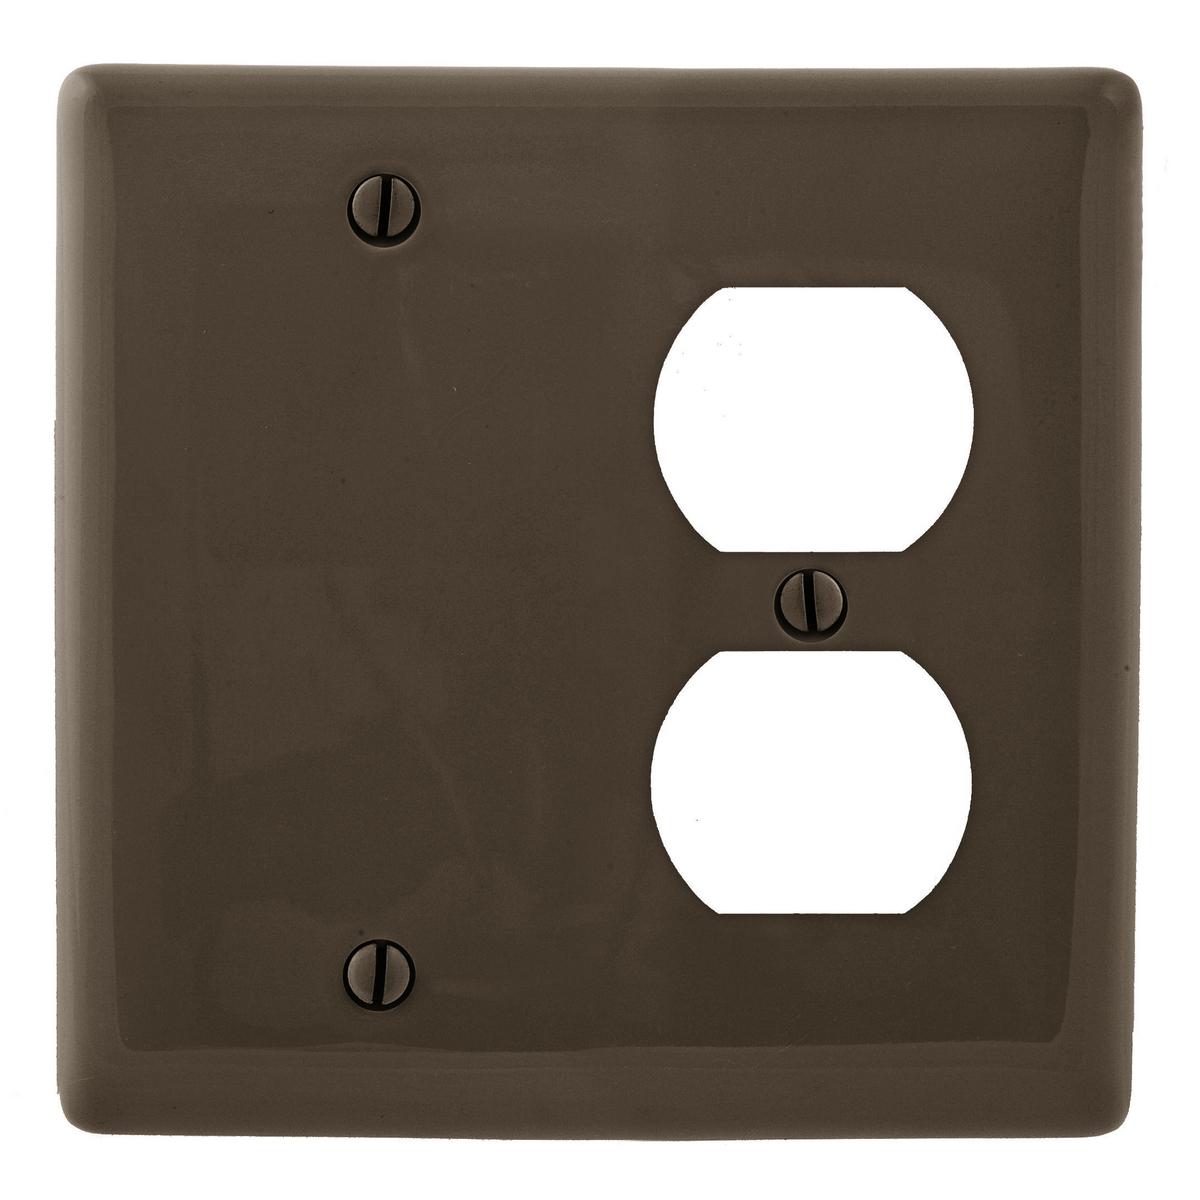 Hubbell NP138 Wallplates and Box Covers, Wallplate, Nylon, 2-Gang, 1) Duplex 1) Blank, Brown  ; Reinforcement ribs for extra strength ; High-impact, self-extinguishing nylon material ; Captive screw feature holds mounting screw in place ; Standard Size is 1/8" larger t